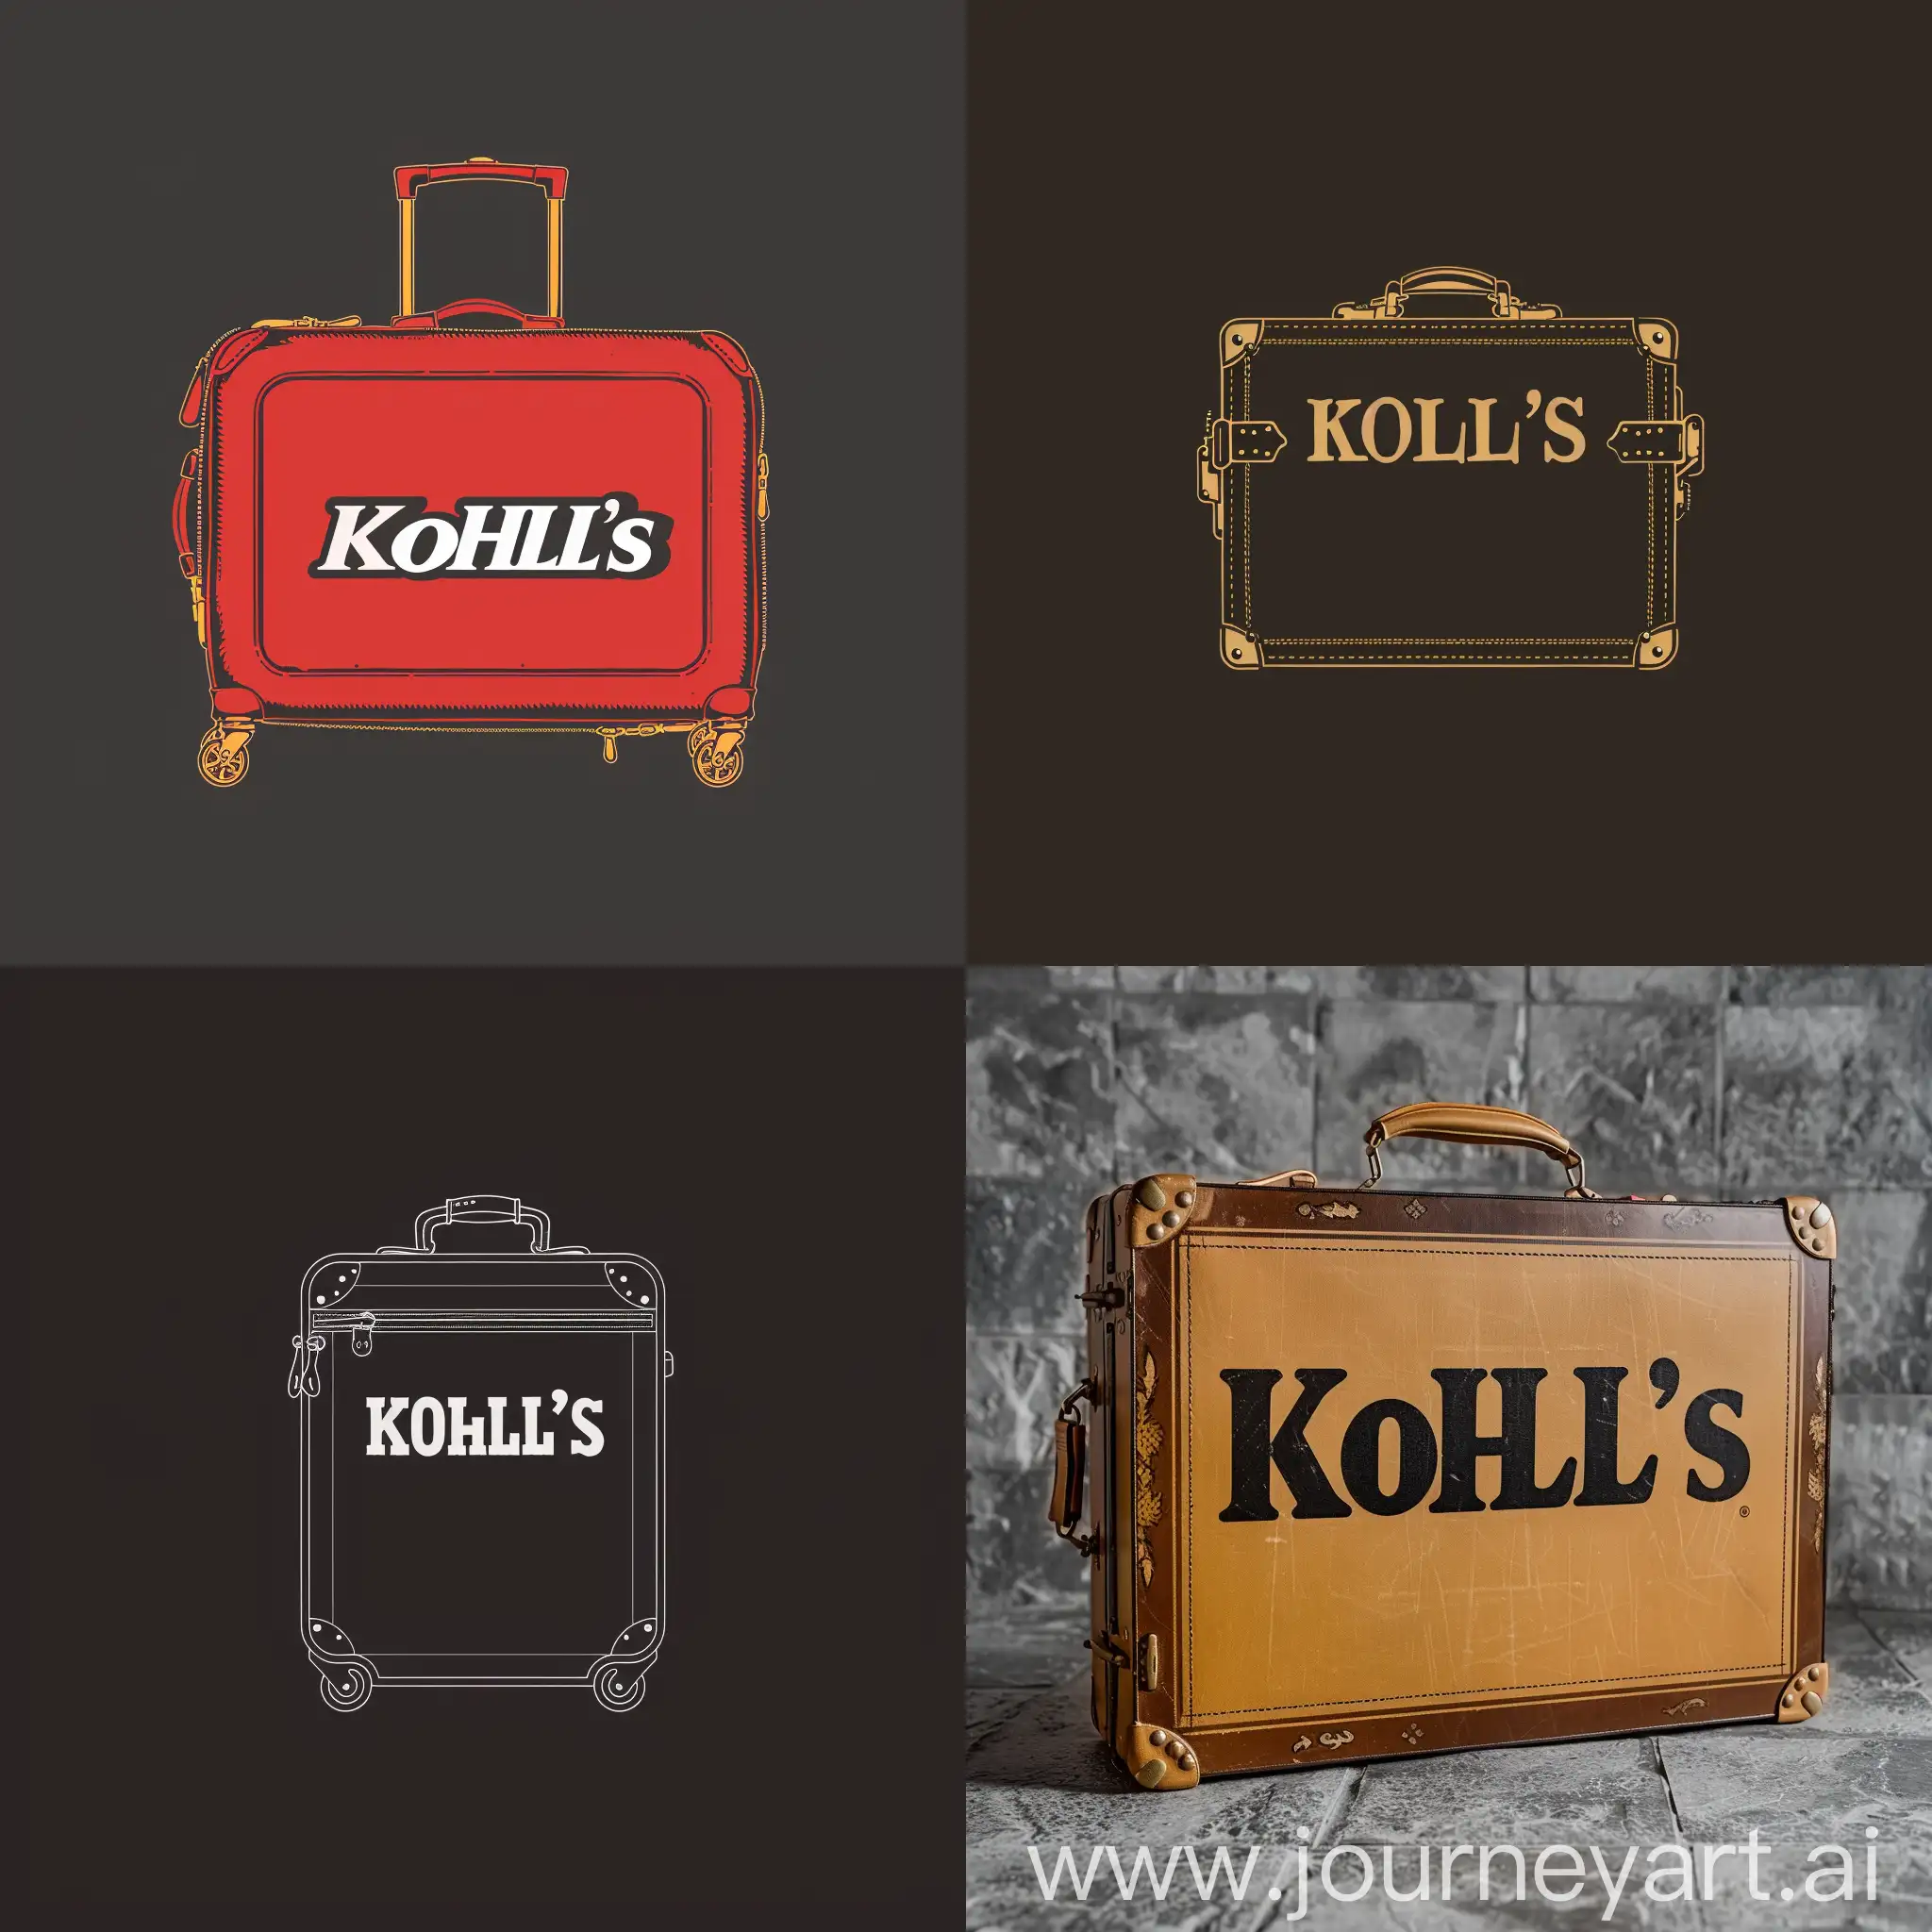 Design a logo for luggage enterprises with the brand name "Kohl's"